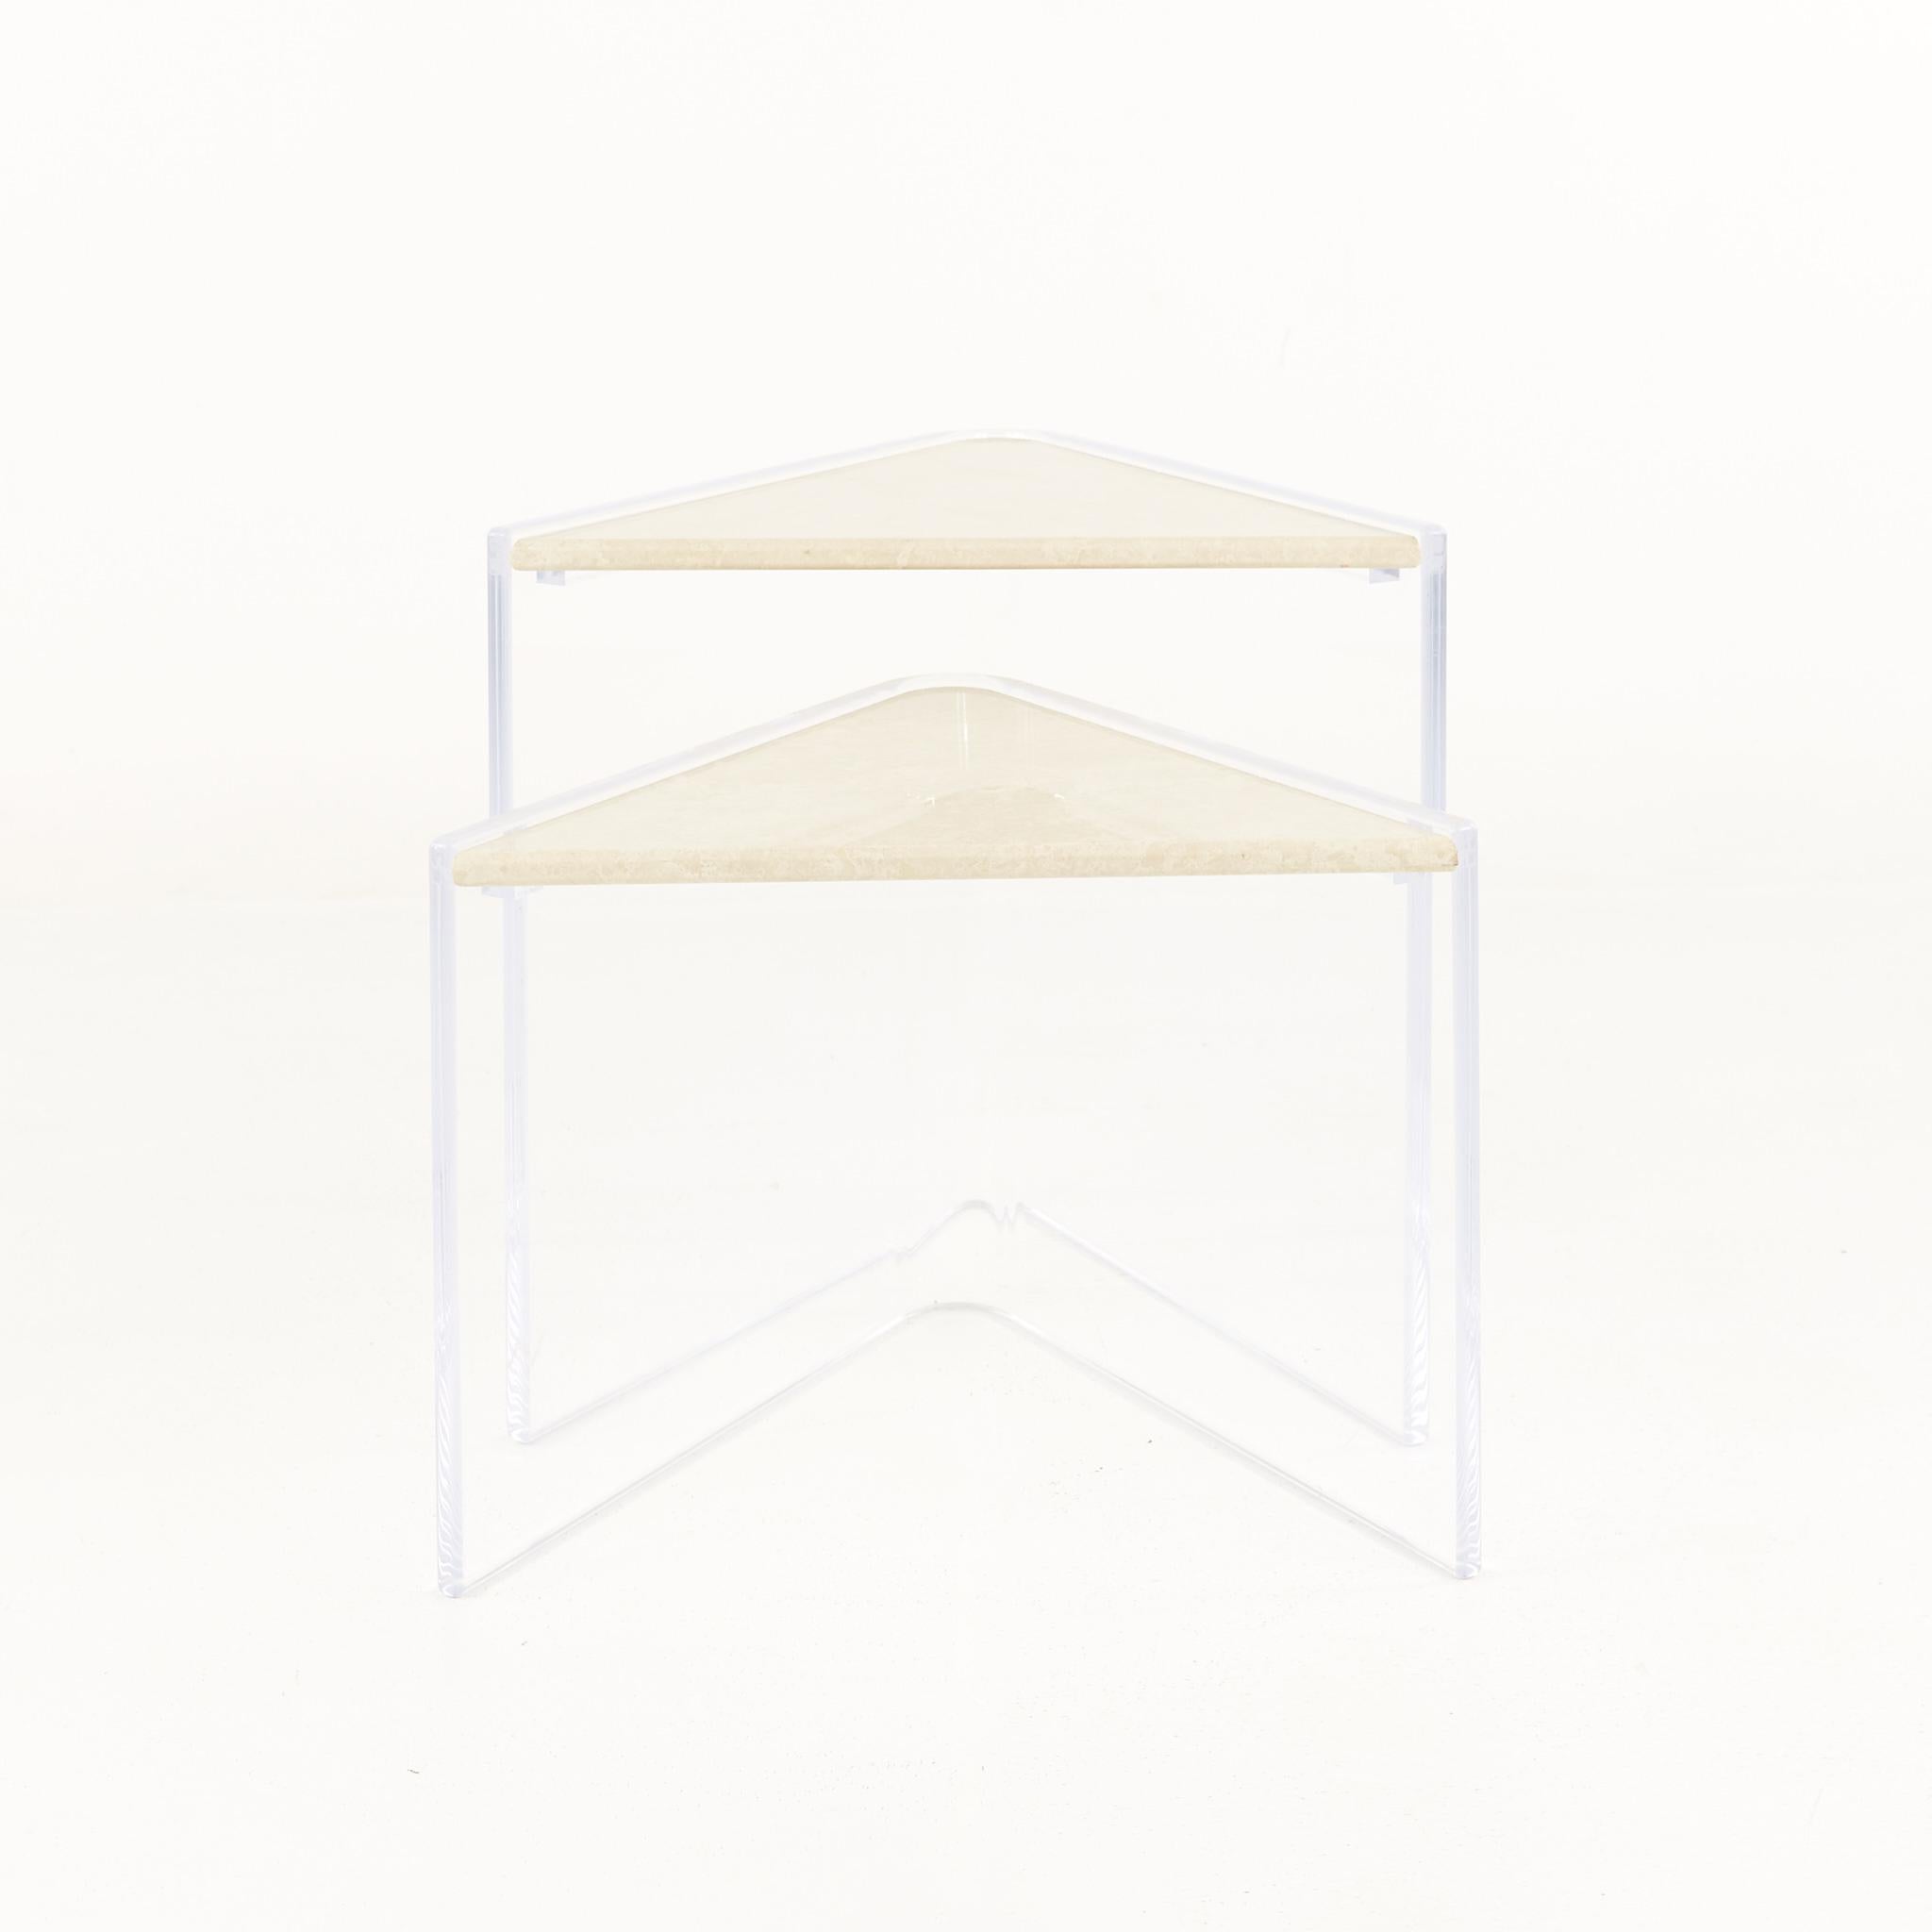 Enrique Garcel mid century Lucite and Travertine marble 2 Piece Triangular nesting tables

These tables measure: 21 wide x 17.25 deep x 21 inches high

All pieces of furniture can be had in what we call restored vintage condition. That means the